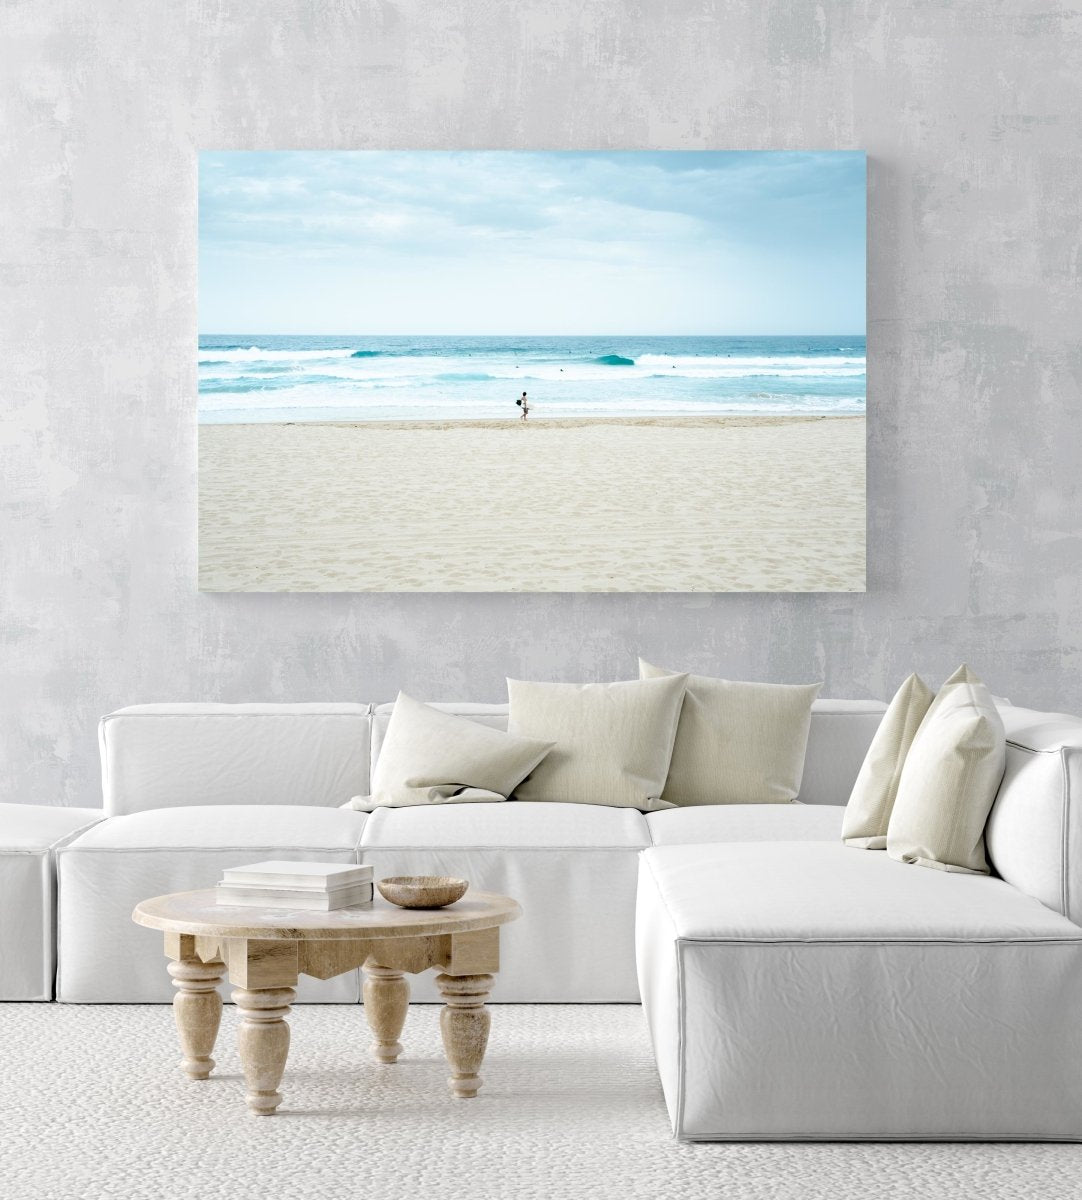 Man with surfboard looking out to blue waves along Manly Beach in Sydney in an acrylic/perspex frame